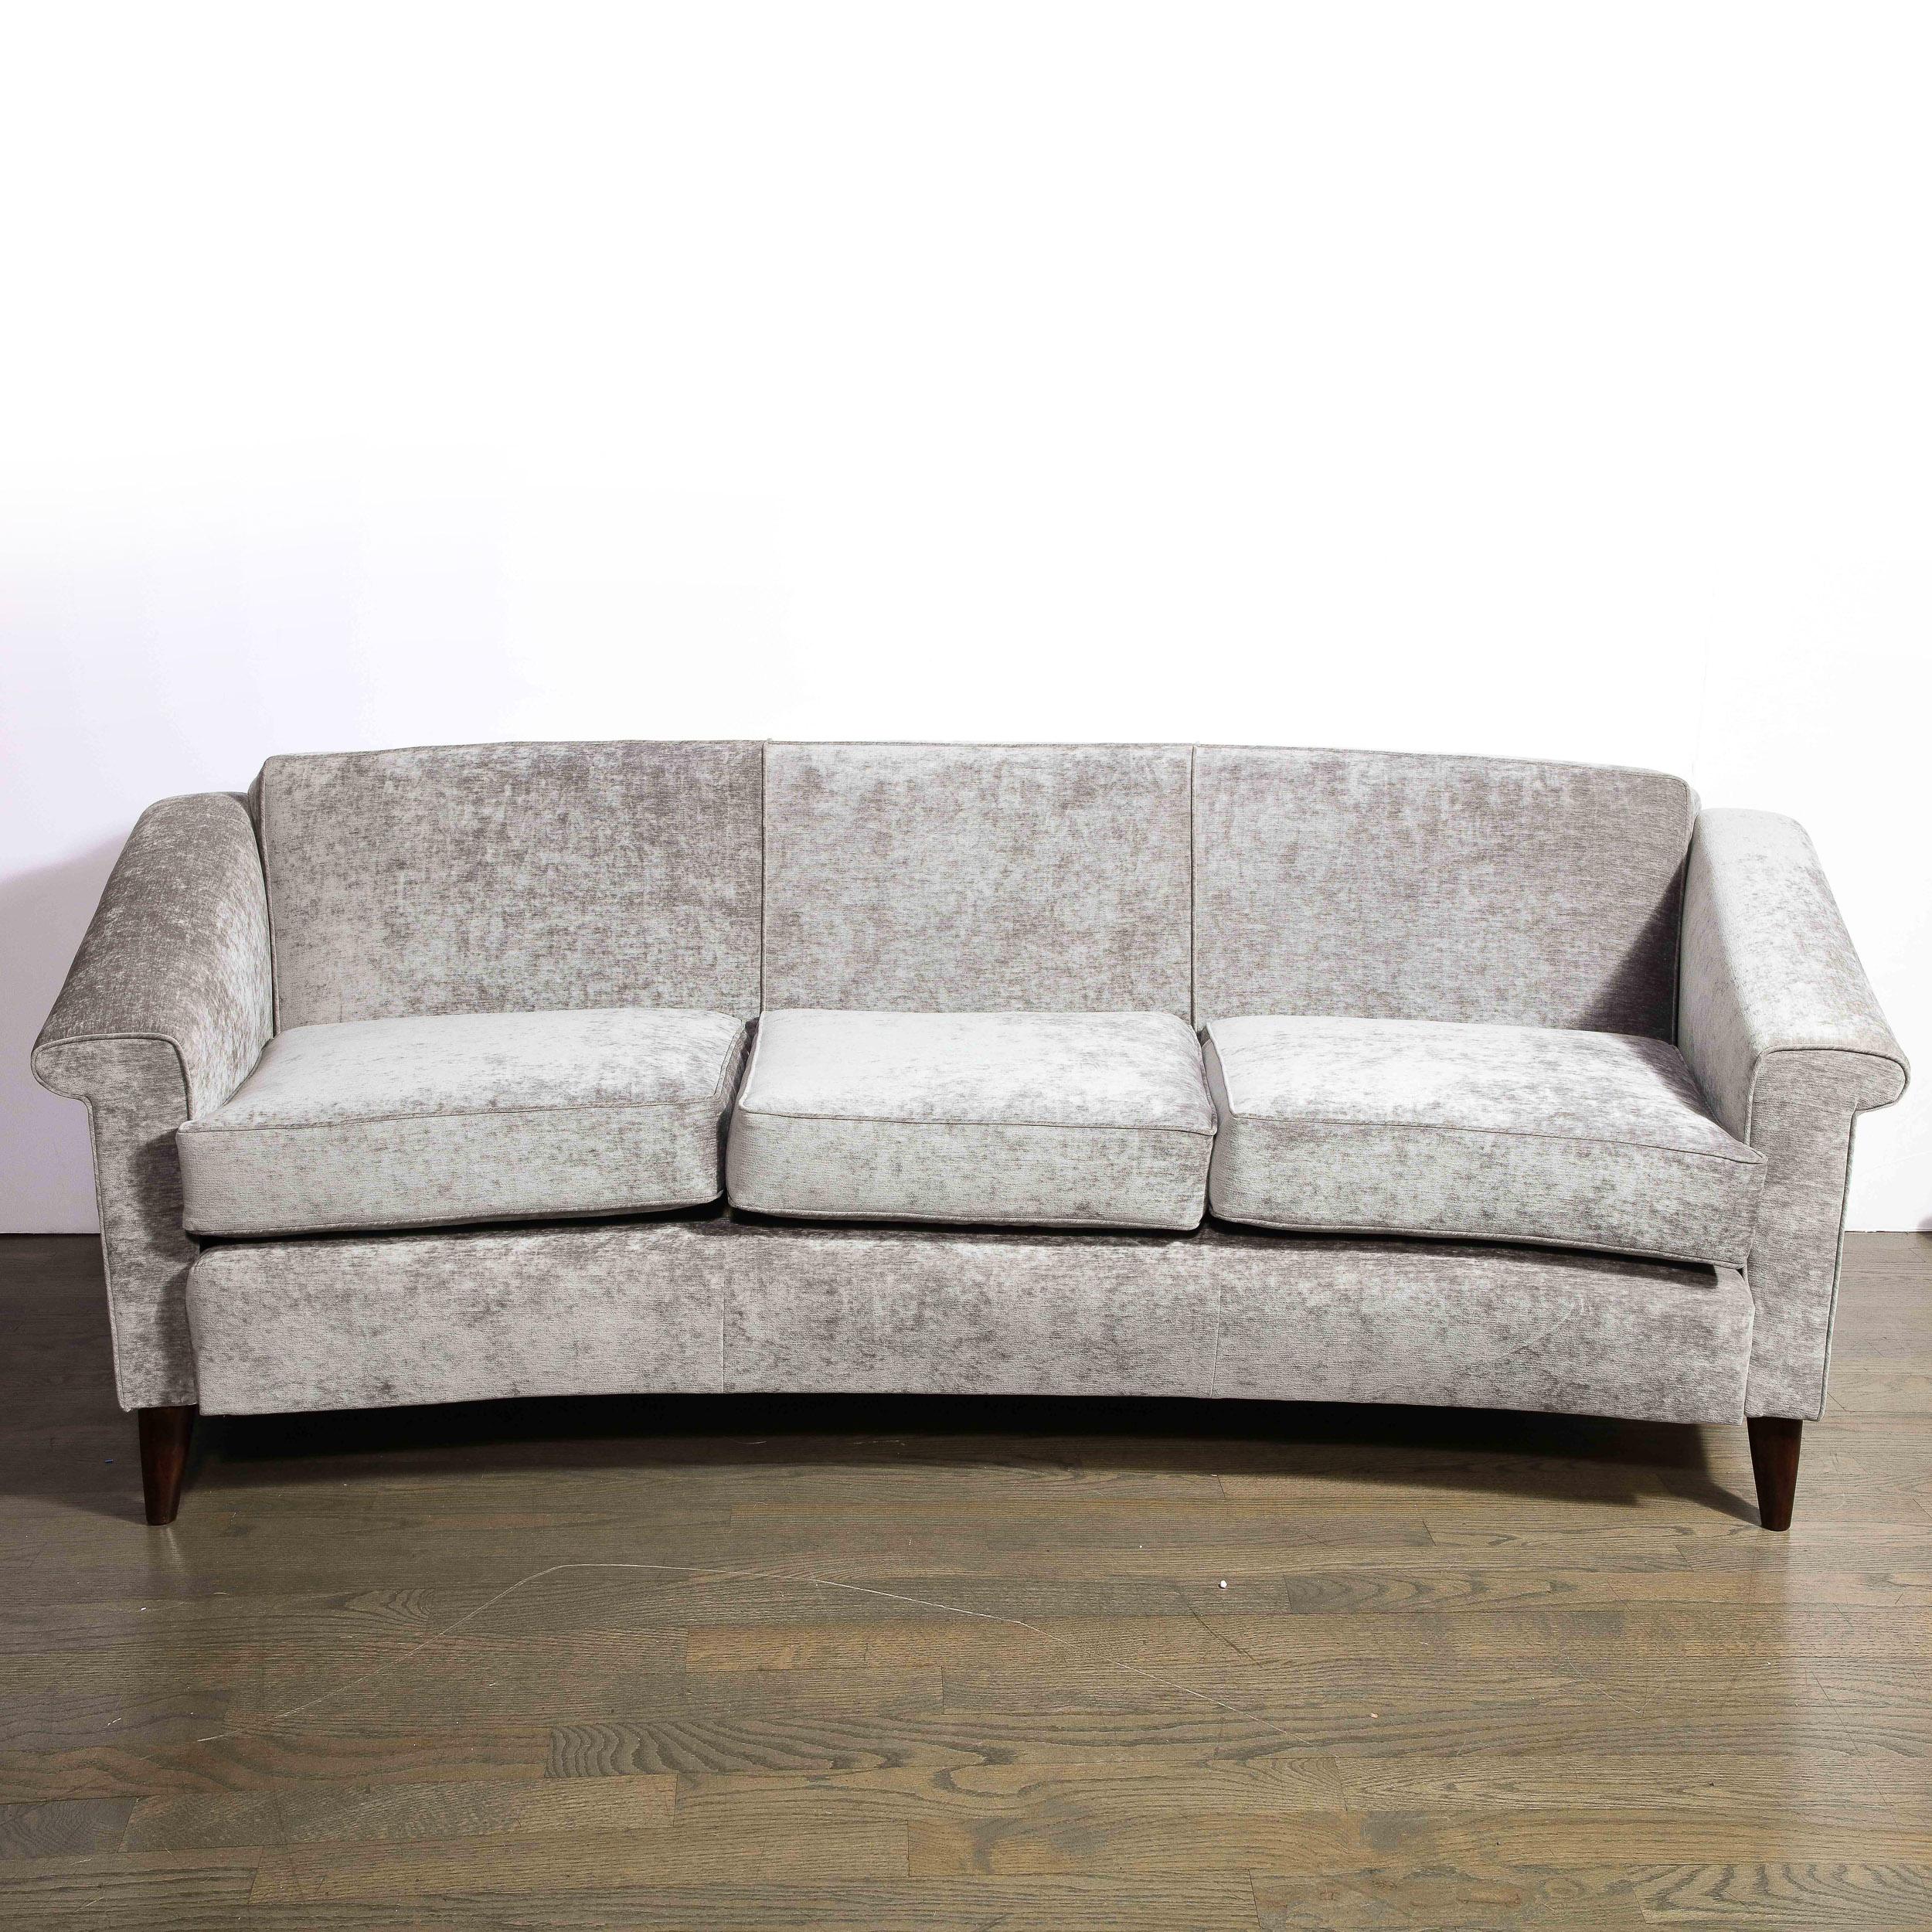 This elegant Mid-Century Modern sofa was realized by the legendary Jules Leleu in France circa 1950. It offers the clean silhouette, attention to detail and timeless (yet perenially modern) aesthetic that discerning collectors of Leleu's designs